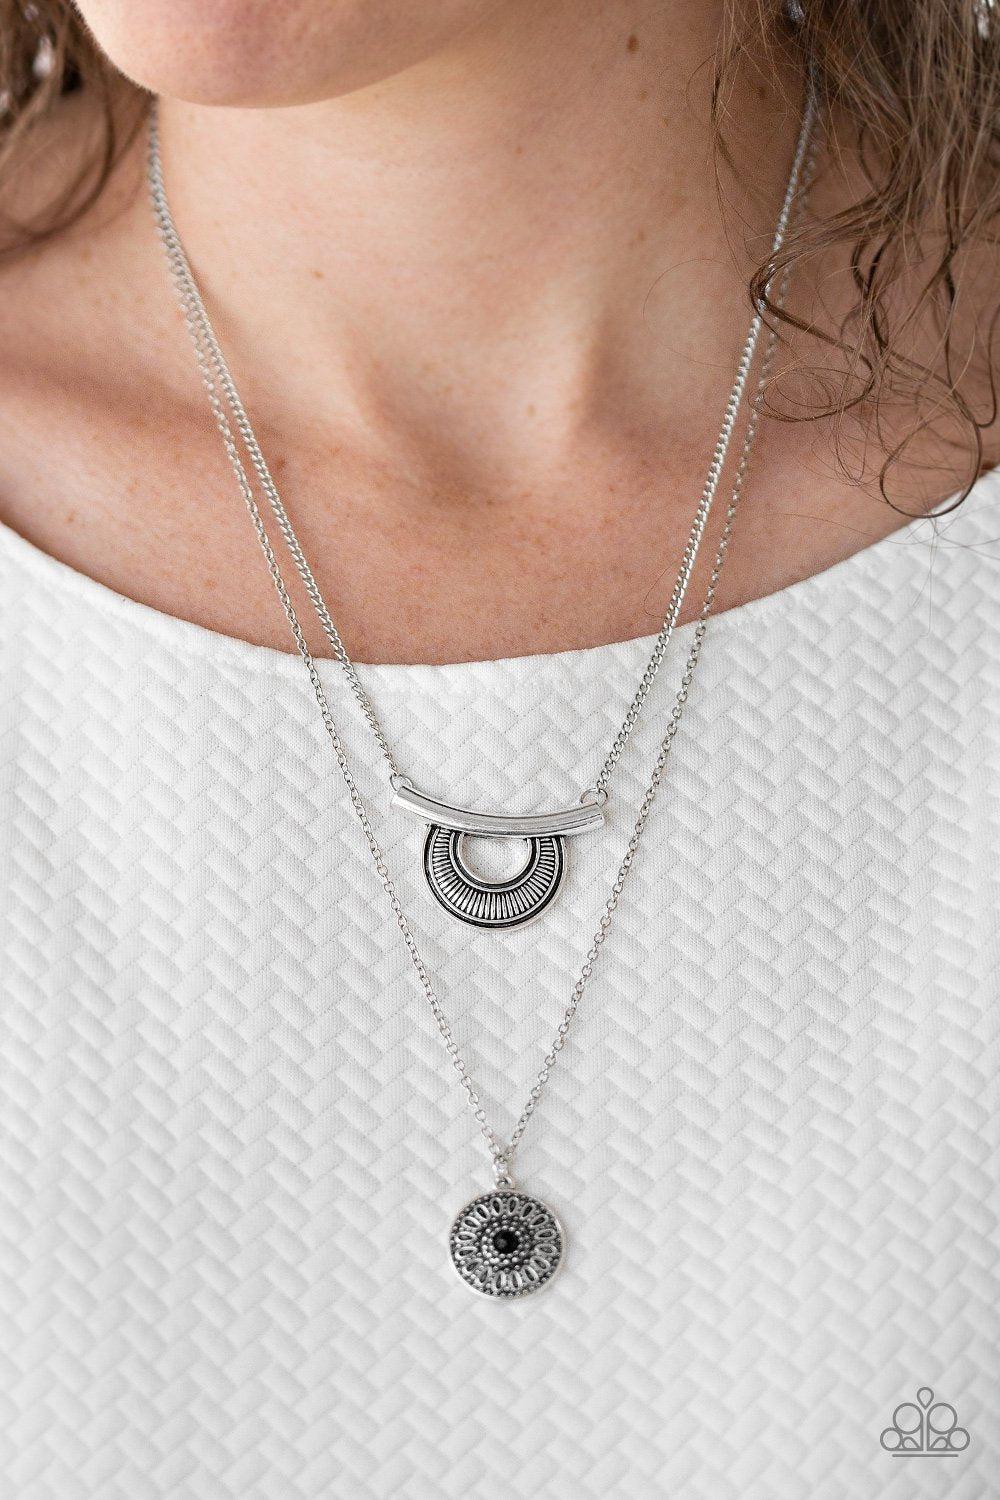 Gypsy Go-Getter Silver and Black Necklace - Paparazzi Accessories-CarasShop.com - $5 Jewelry by Cara Jewels